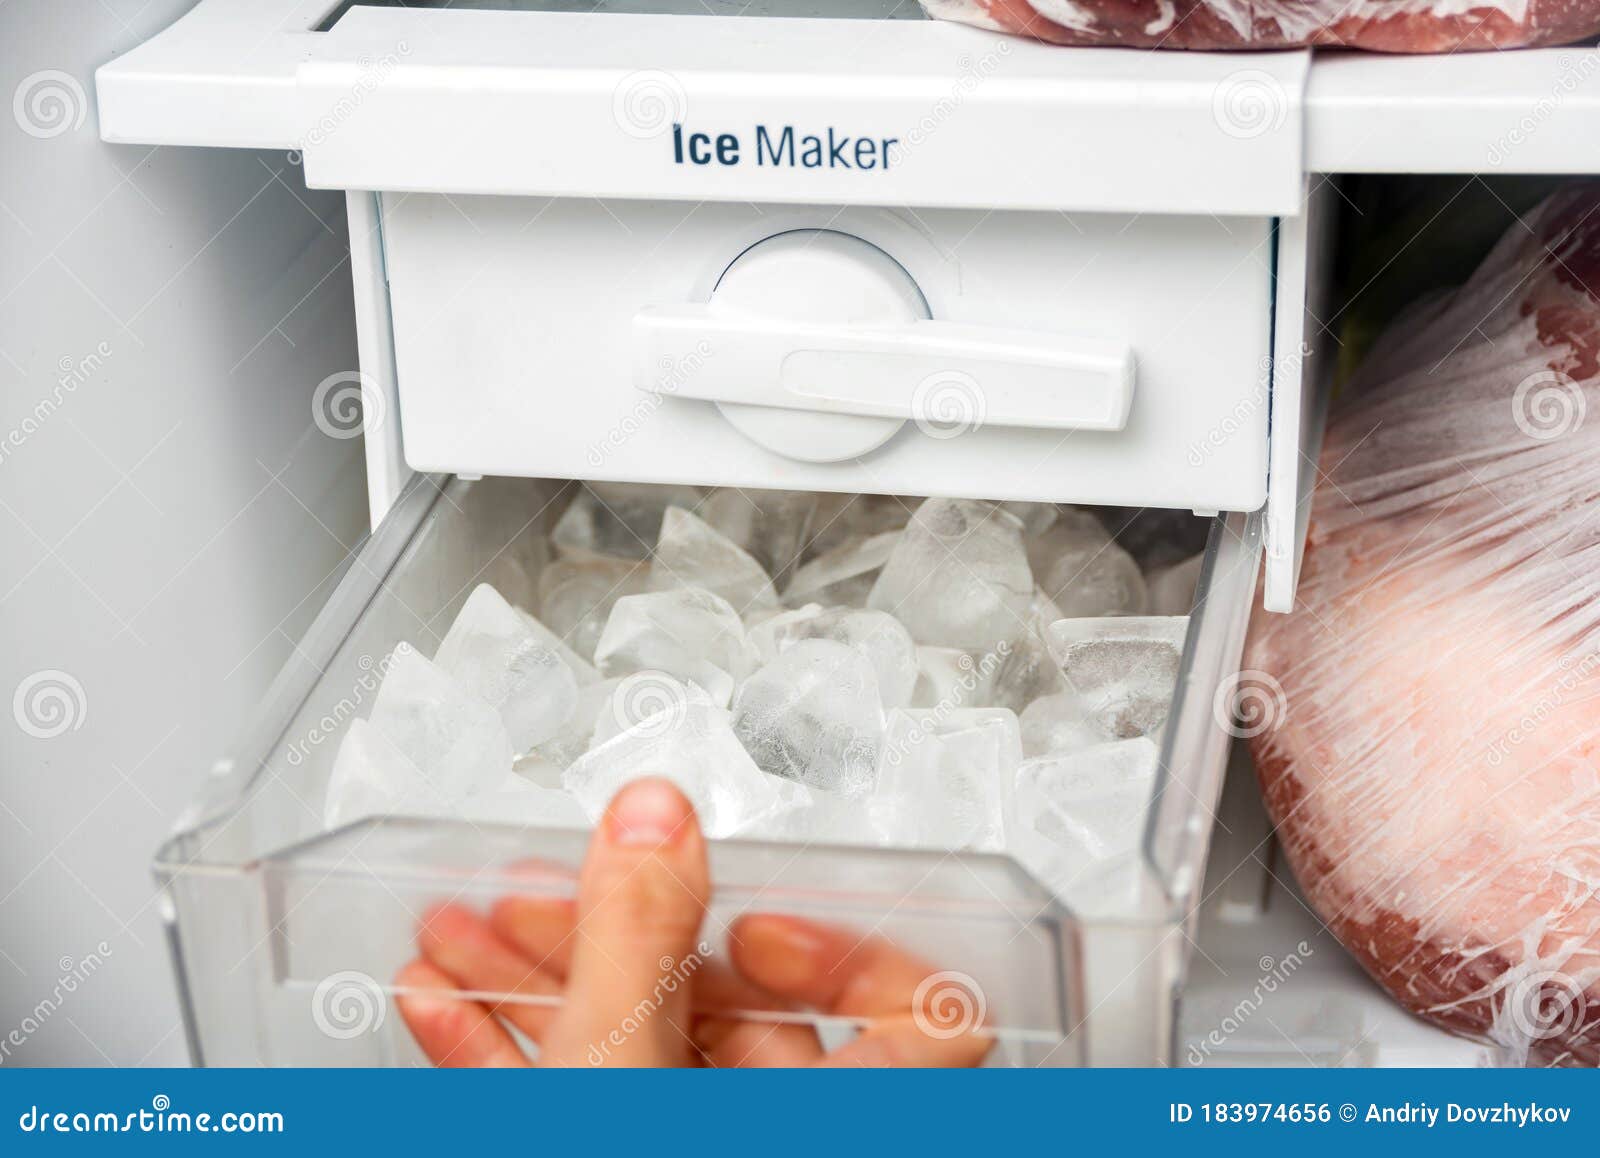 a woman opens an ice maker tray in the freezer to take ice cubes to cool drinks